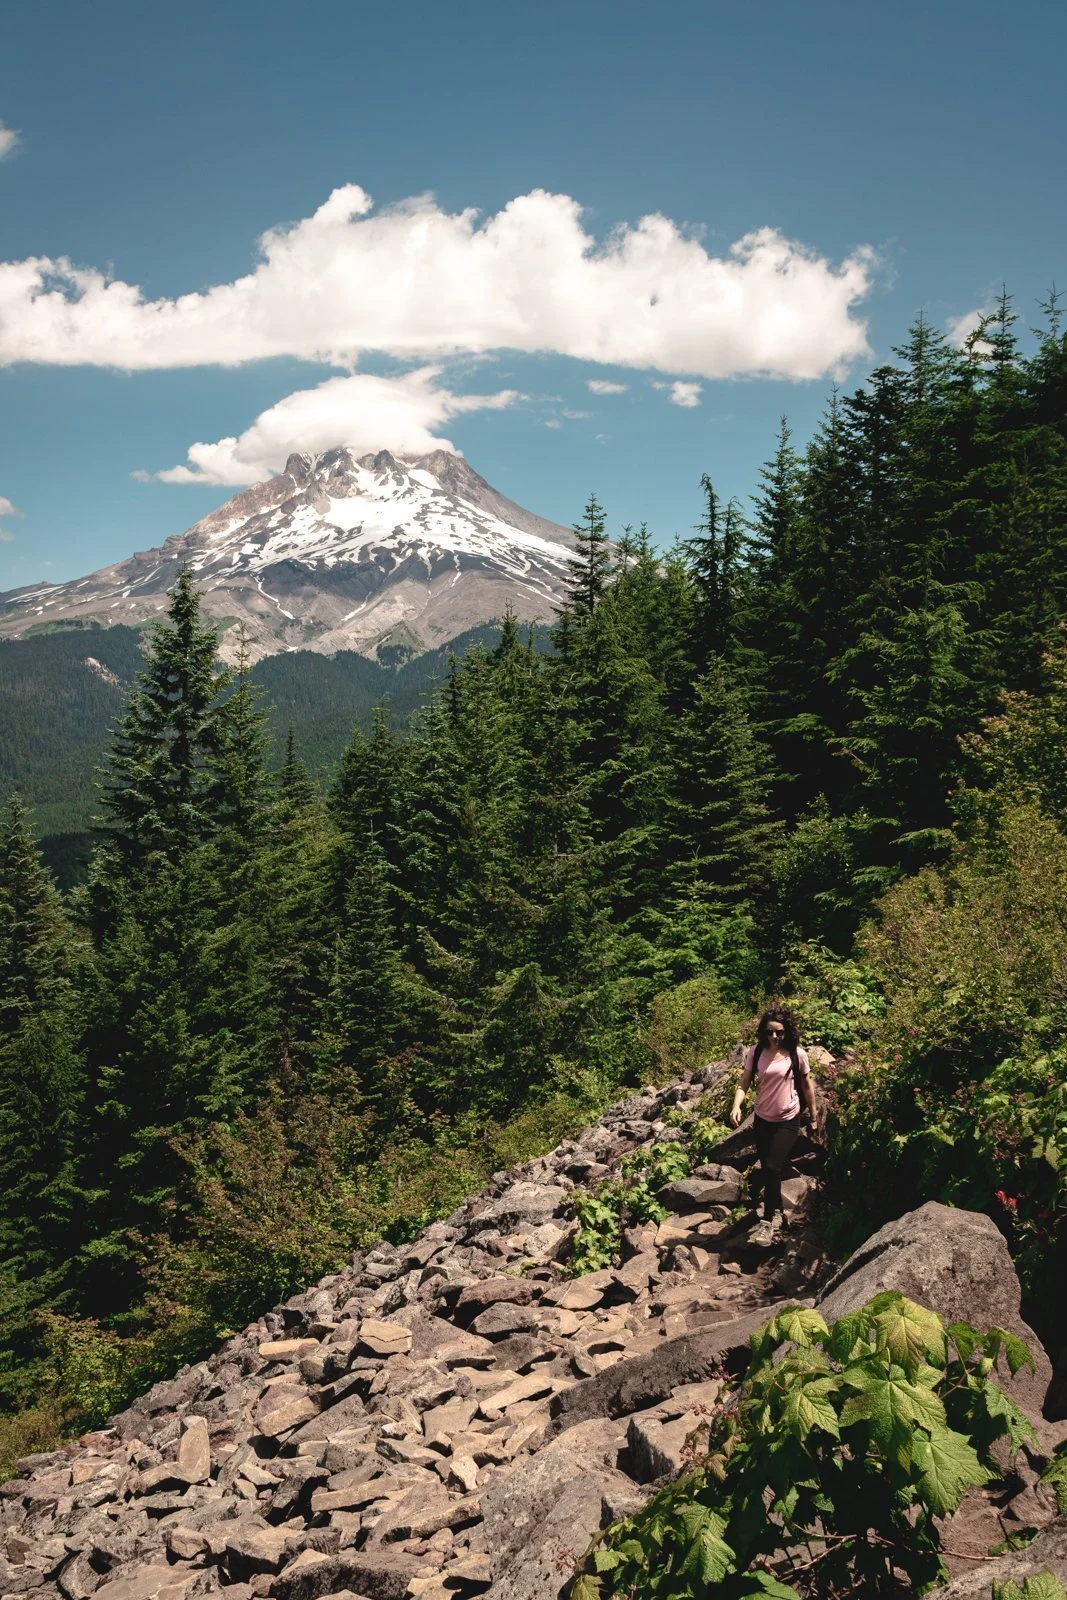 Tom Dick and Harry Mountain offers fun trails for your Portland road trip.